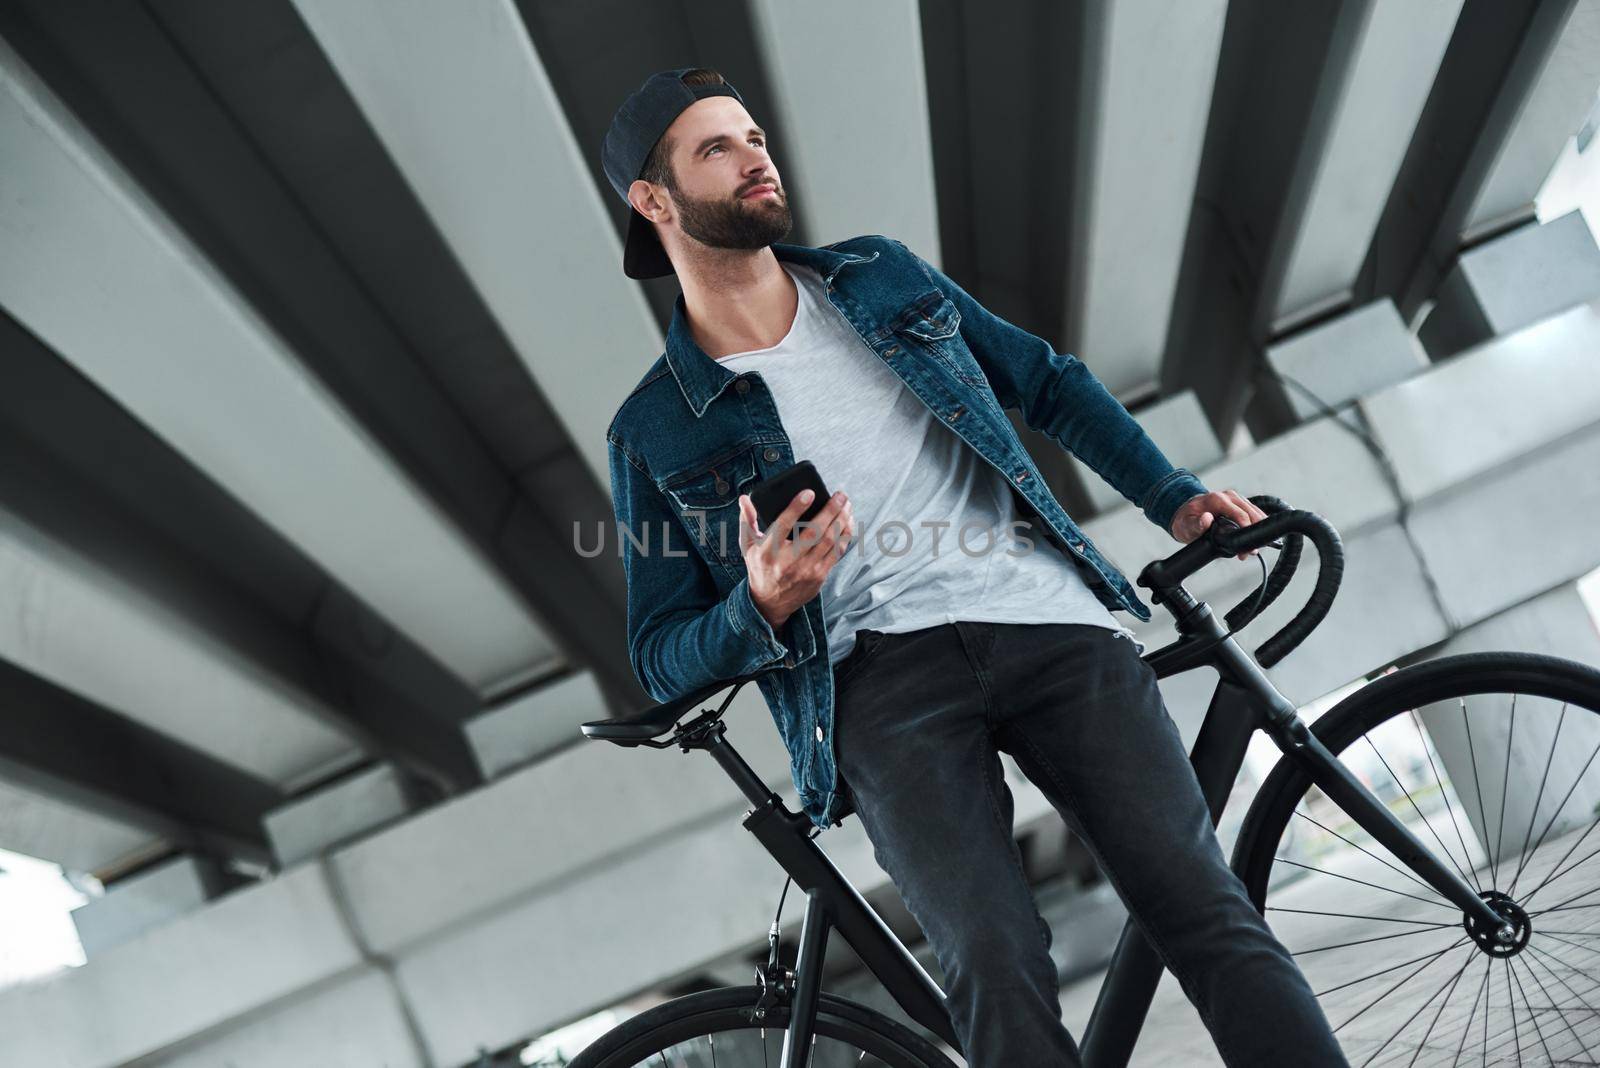 Outdoors leisure. Young stylish man sitting on bycicle on city street holding smartphone looking aside smiling joyful